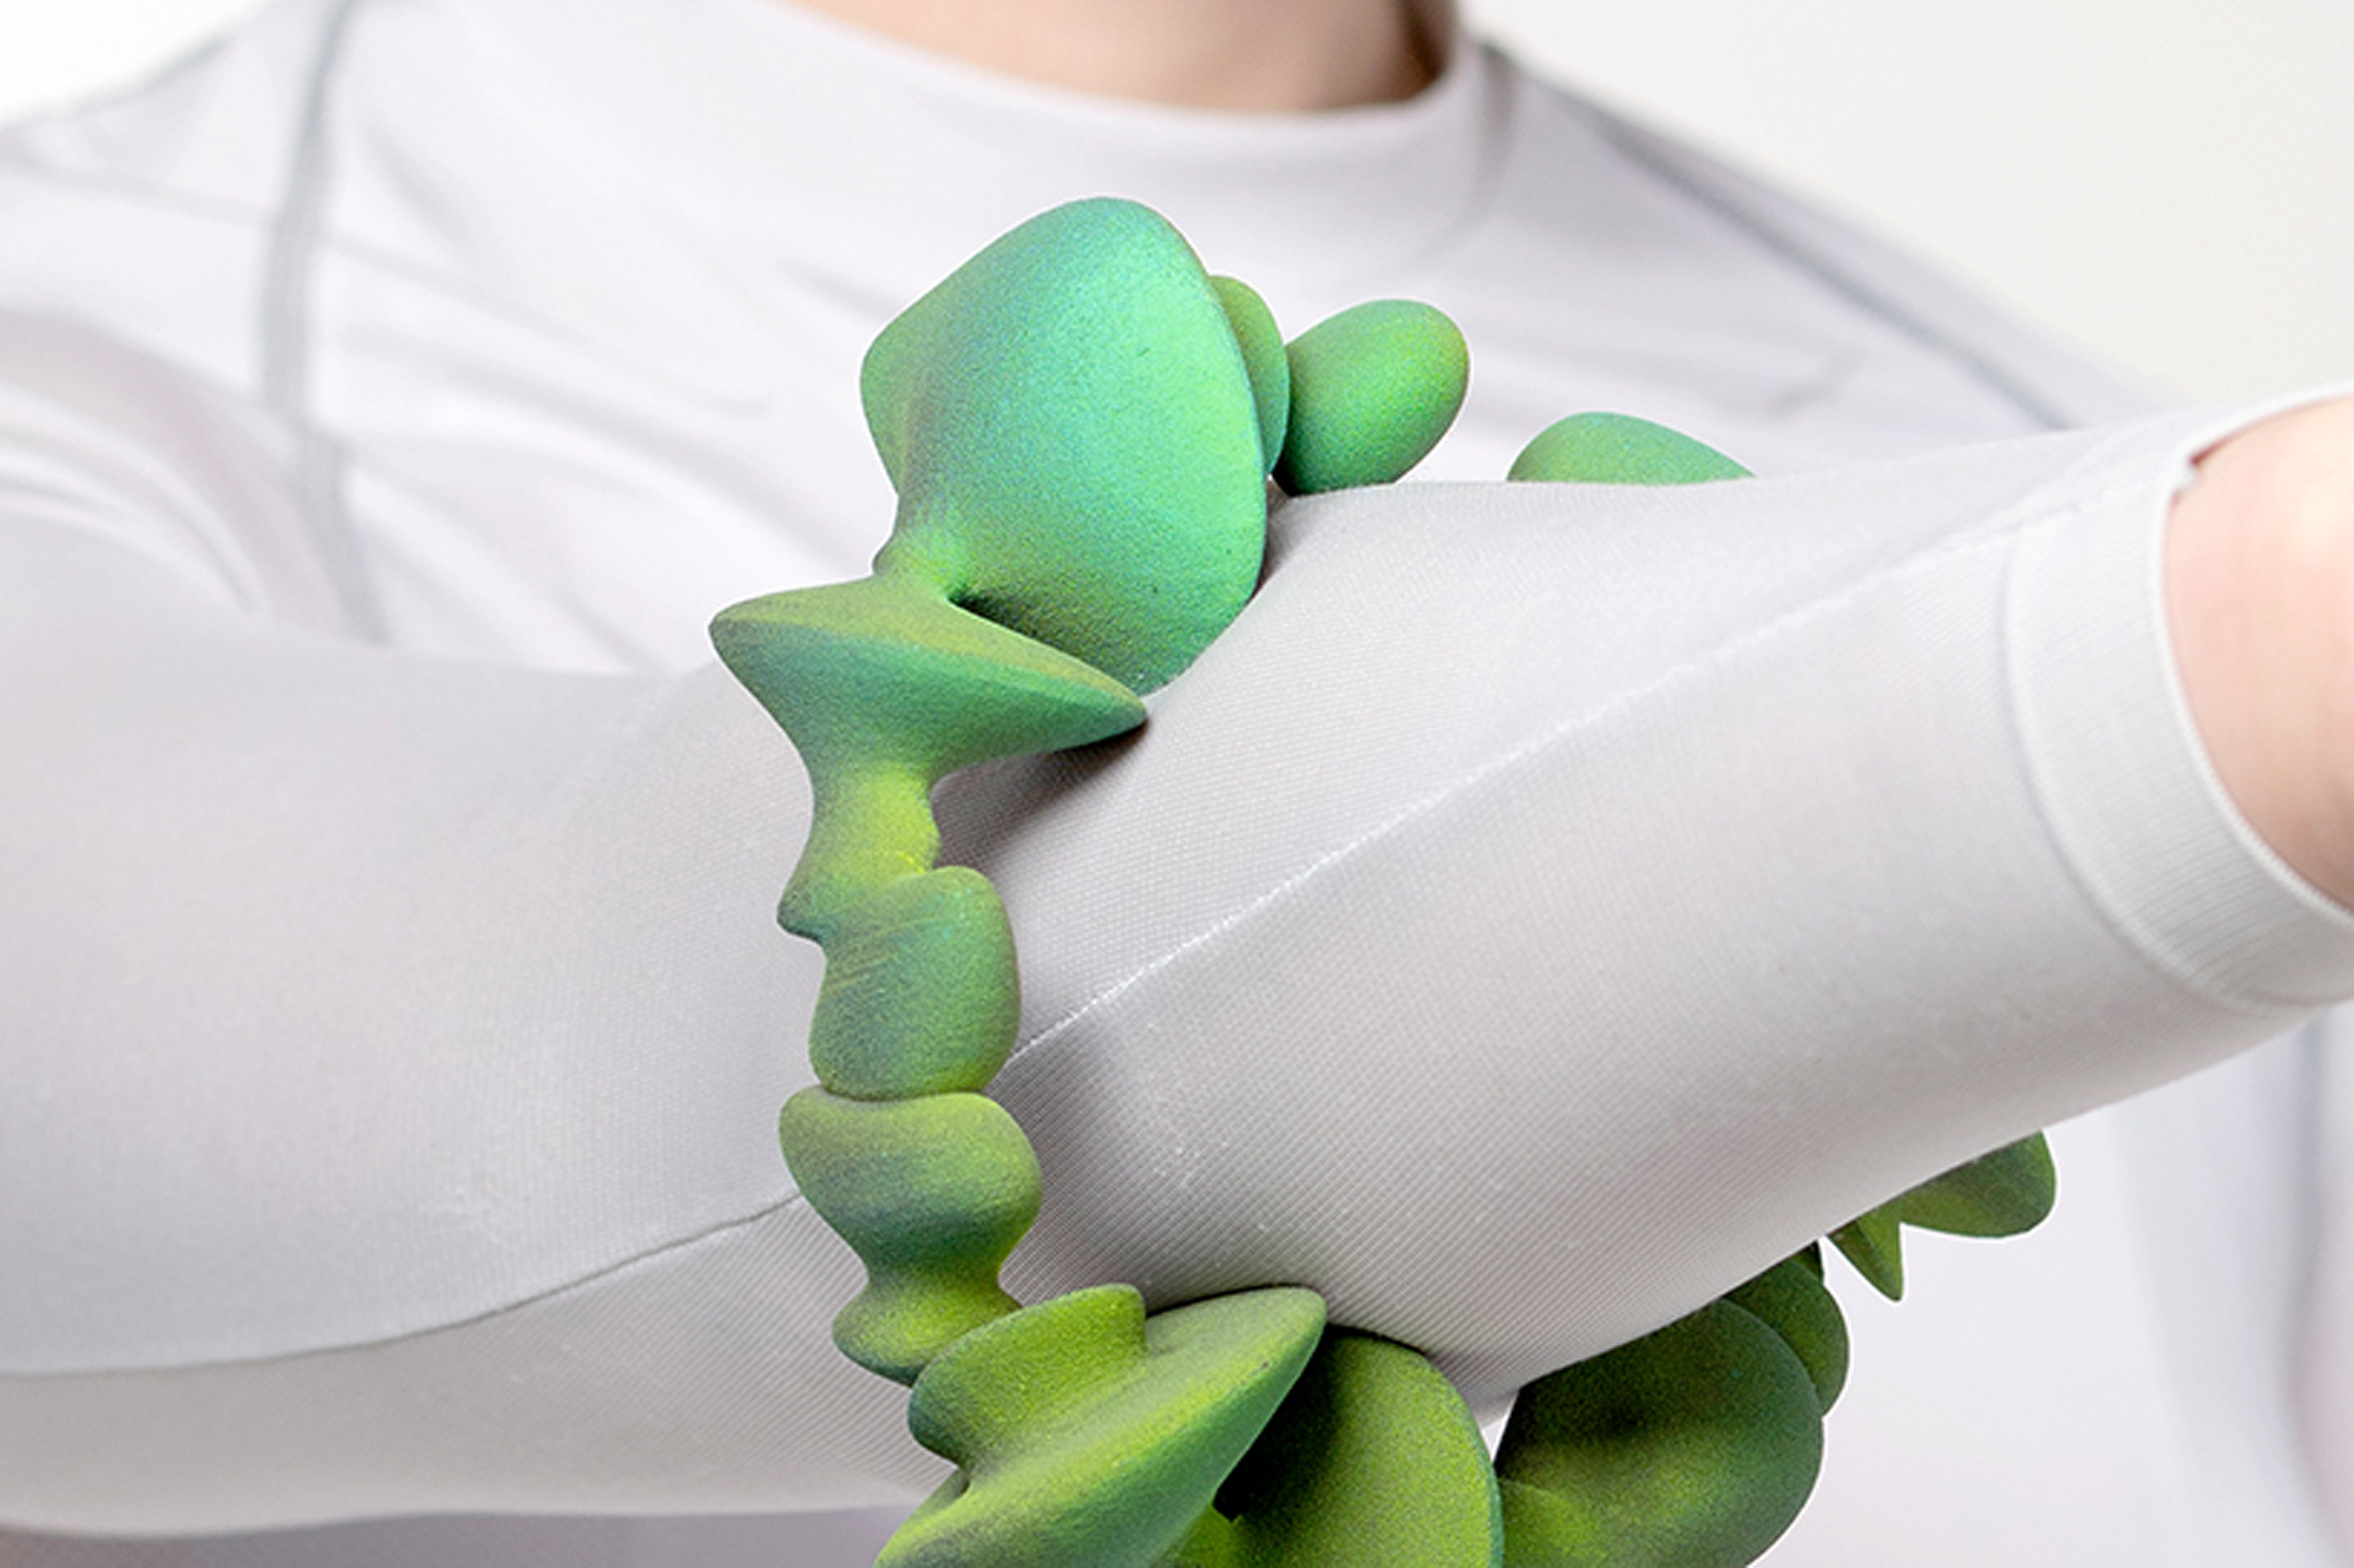 Green ombre bulbous bracelet on a person's arm by a Lucerne School of Art and Design student